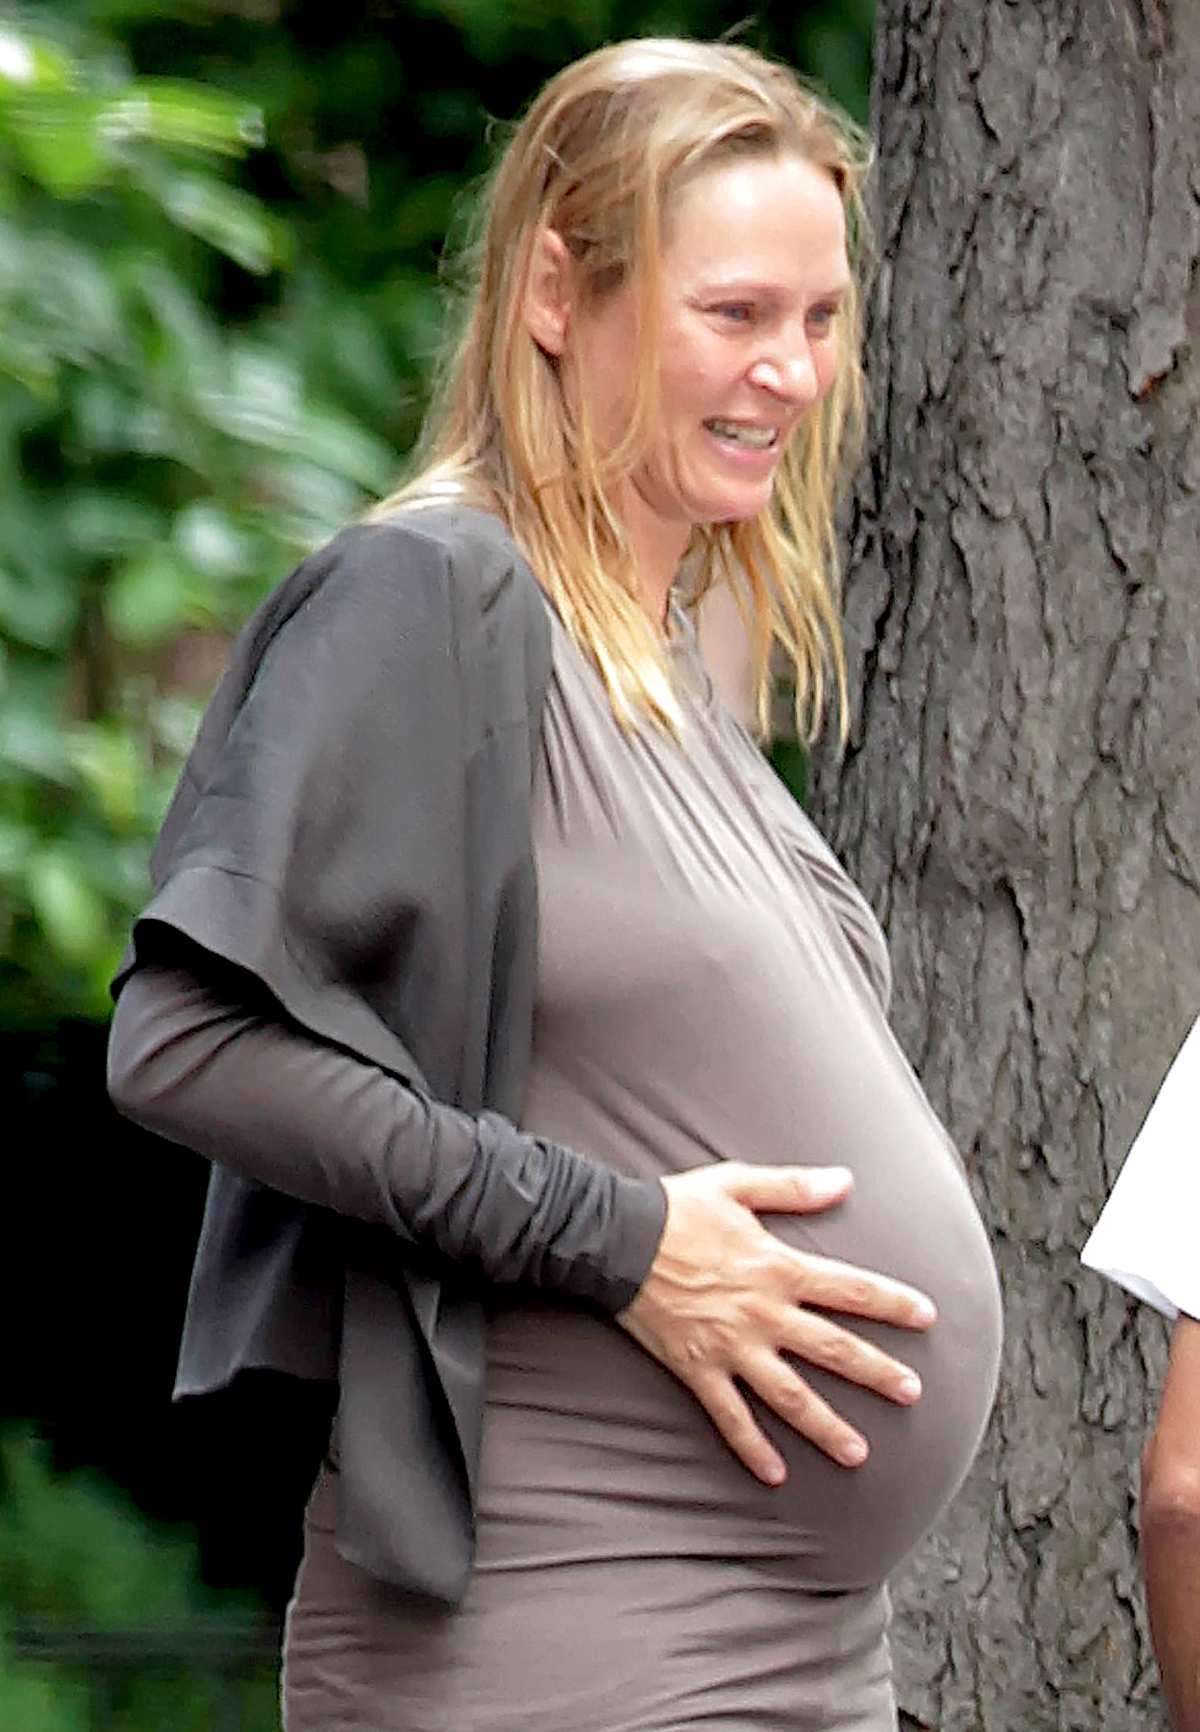 Pregnant Granny Tits - Celebrities Over 40 and Pregnant: Baby Bump Pics